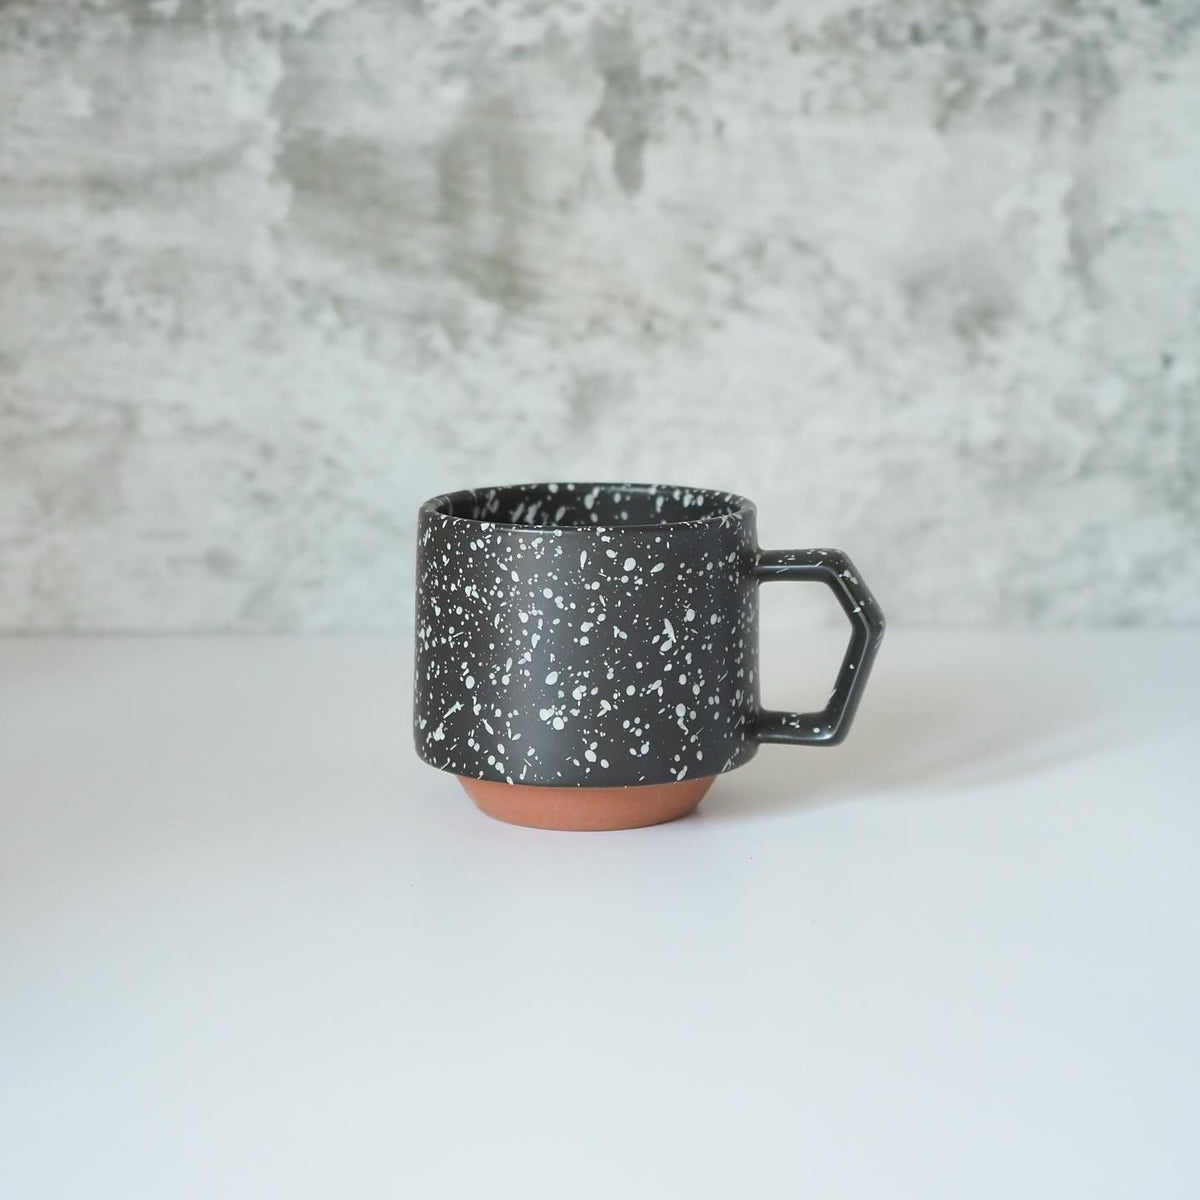 A Stacking Mug – Speckled Black, with a black and white speckled pattern, placed on a table. (Brand: CHIPS Inc.)